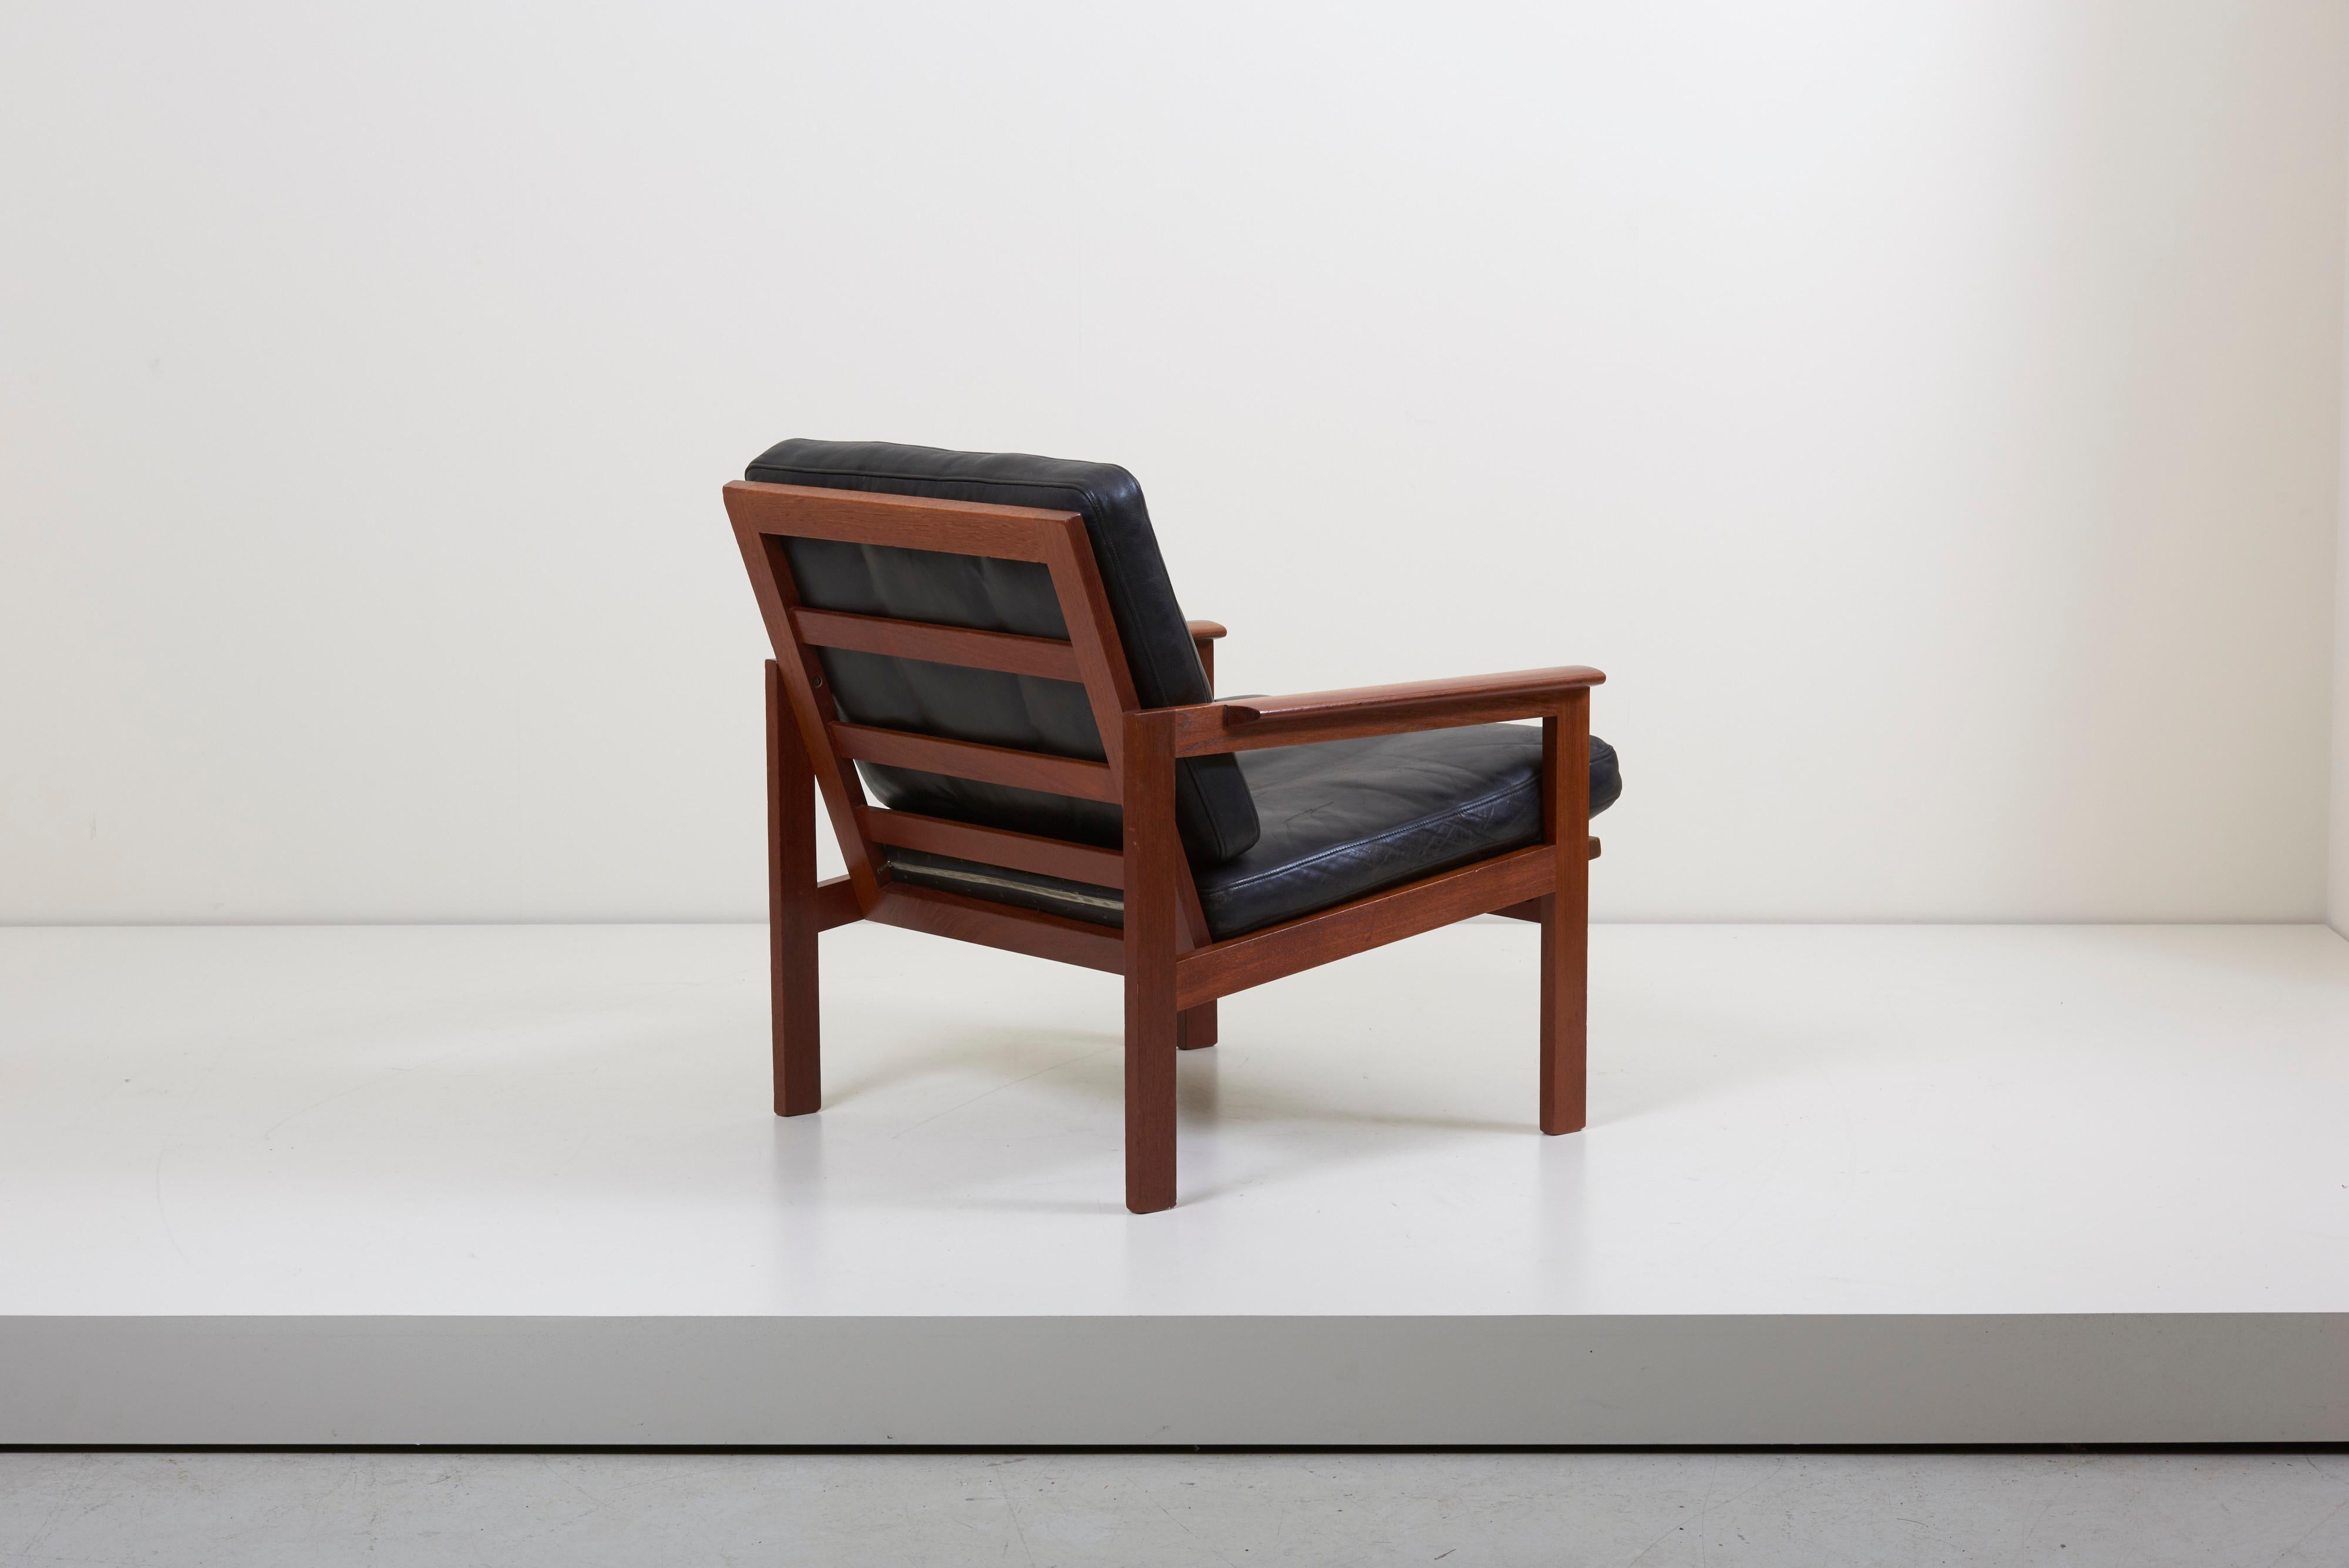 Mid-20th Century Pair of Lounge Chairs in Teak and Leather by Danish Architect Illum Wikkelsø